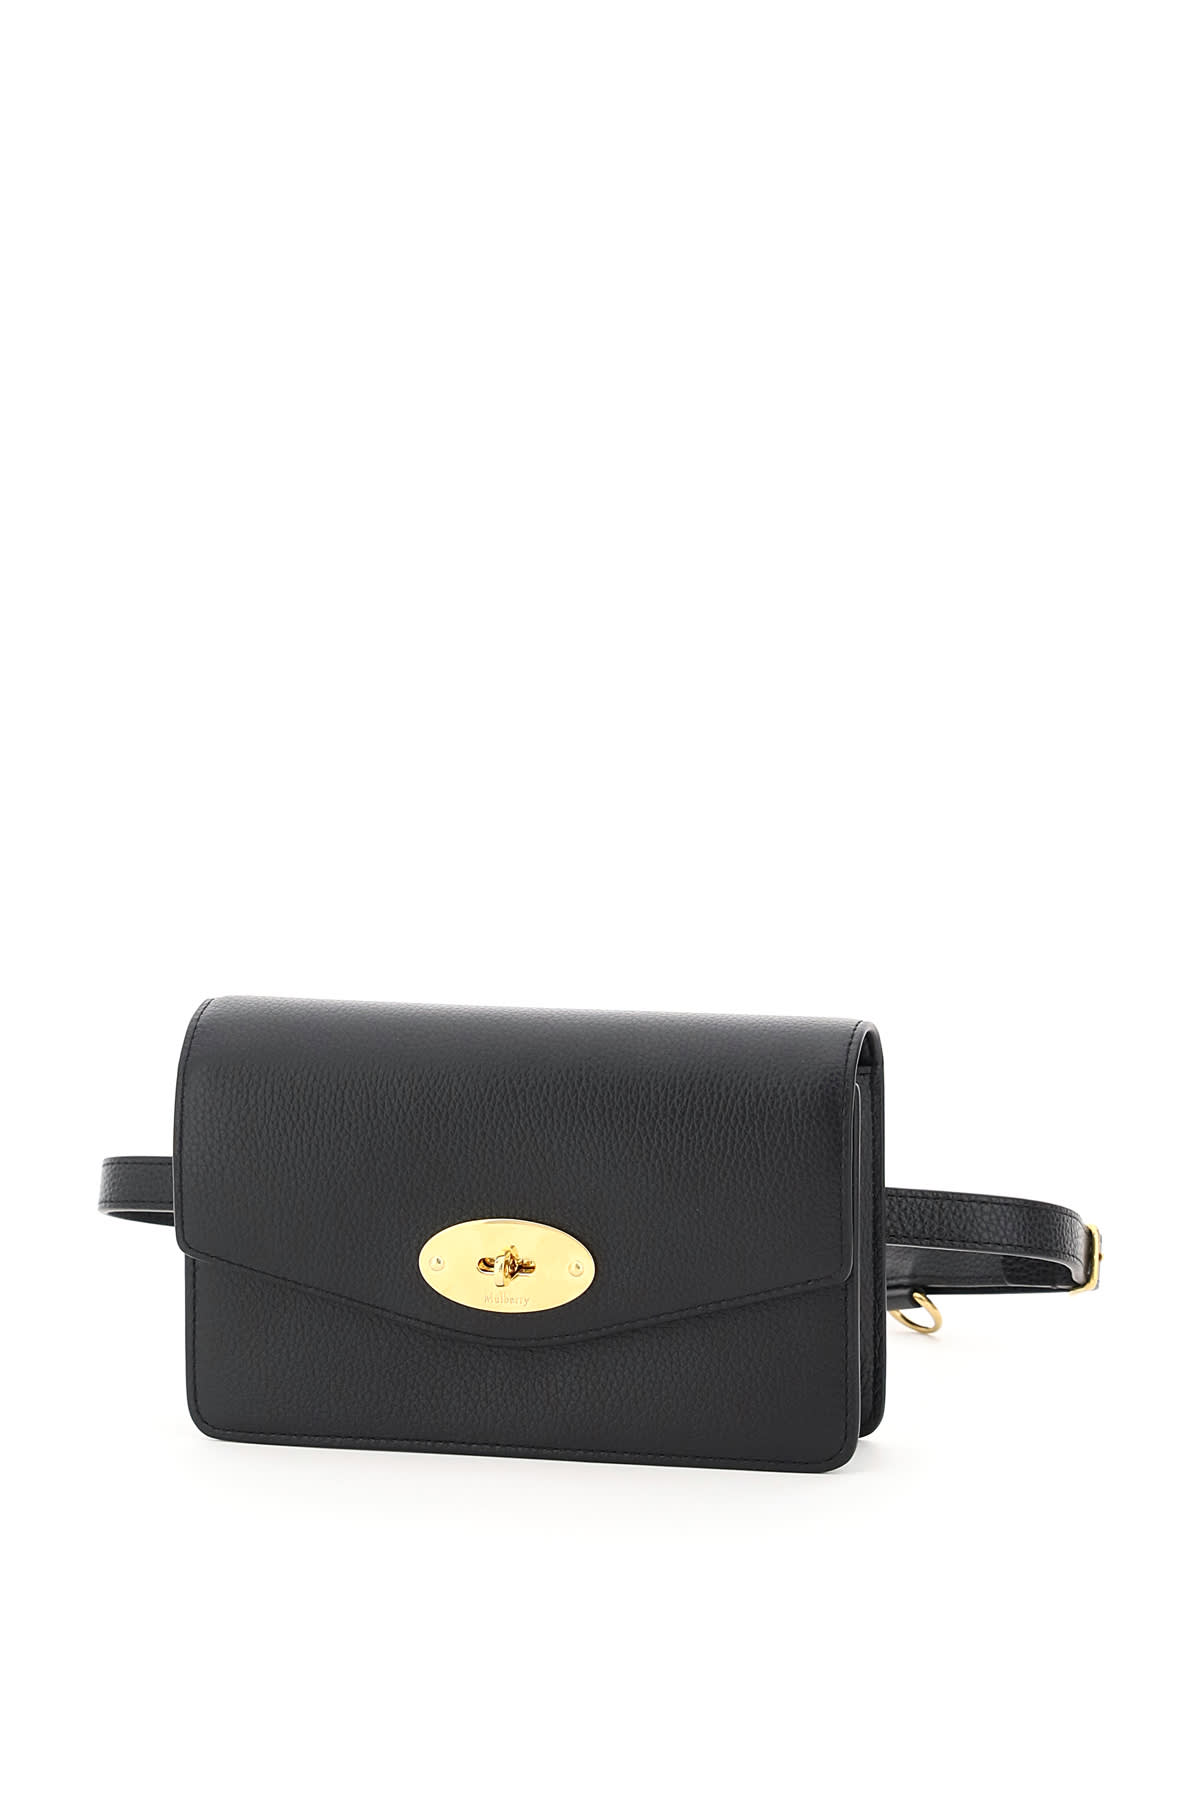 Mulberry SMALL DARLEY LEATHER BELT BAG